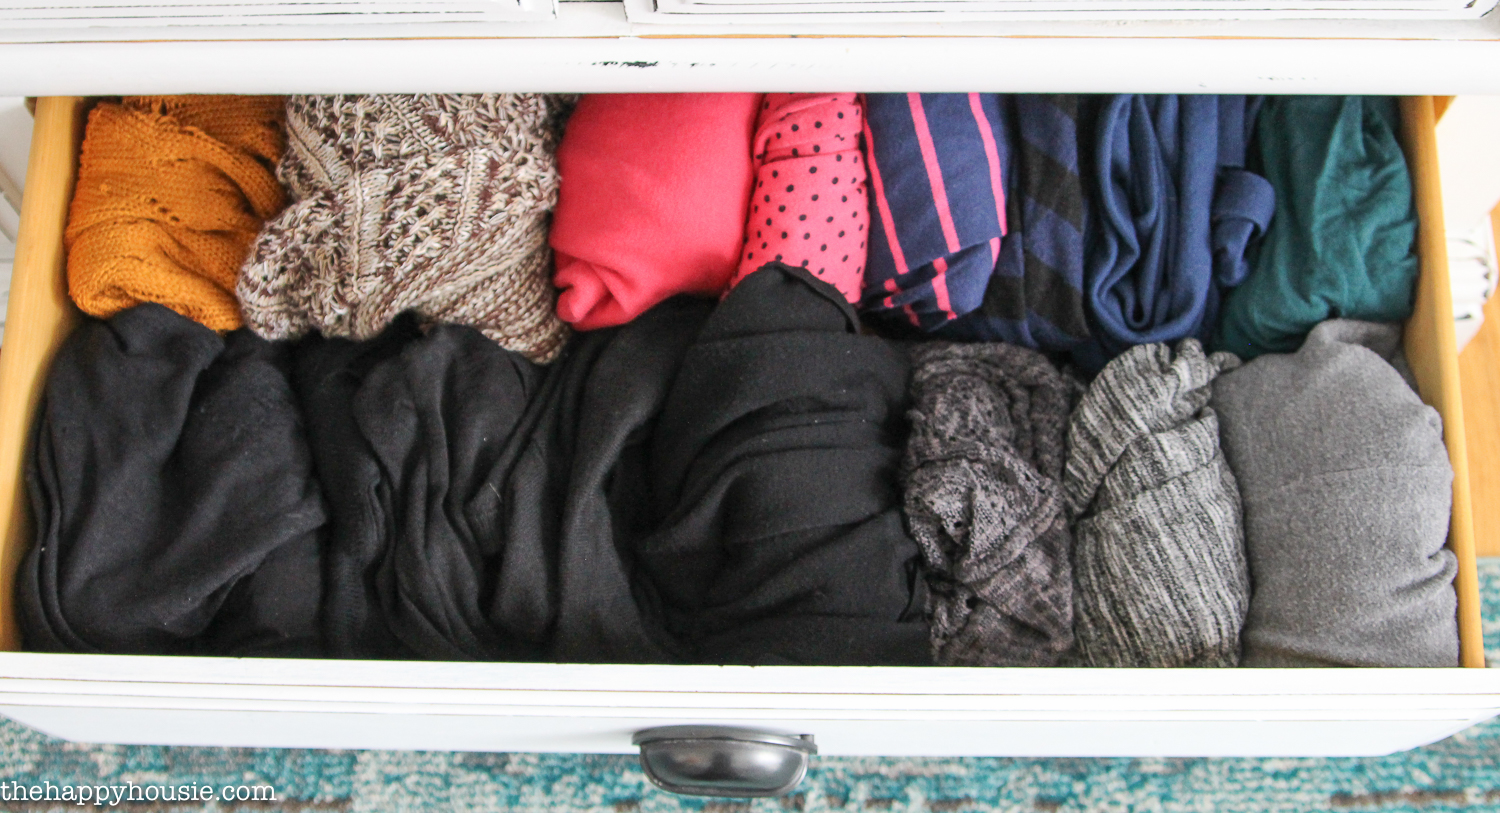 7 Tips for Completely Organizing Your Closet and Dresser | The Happy Housie